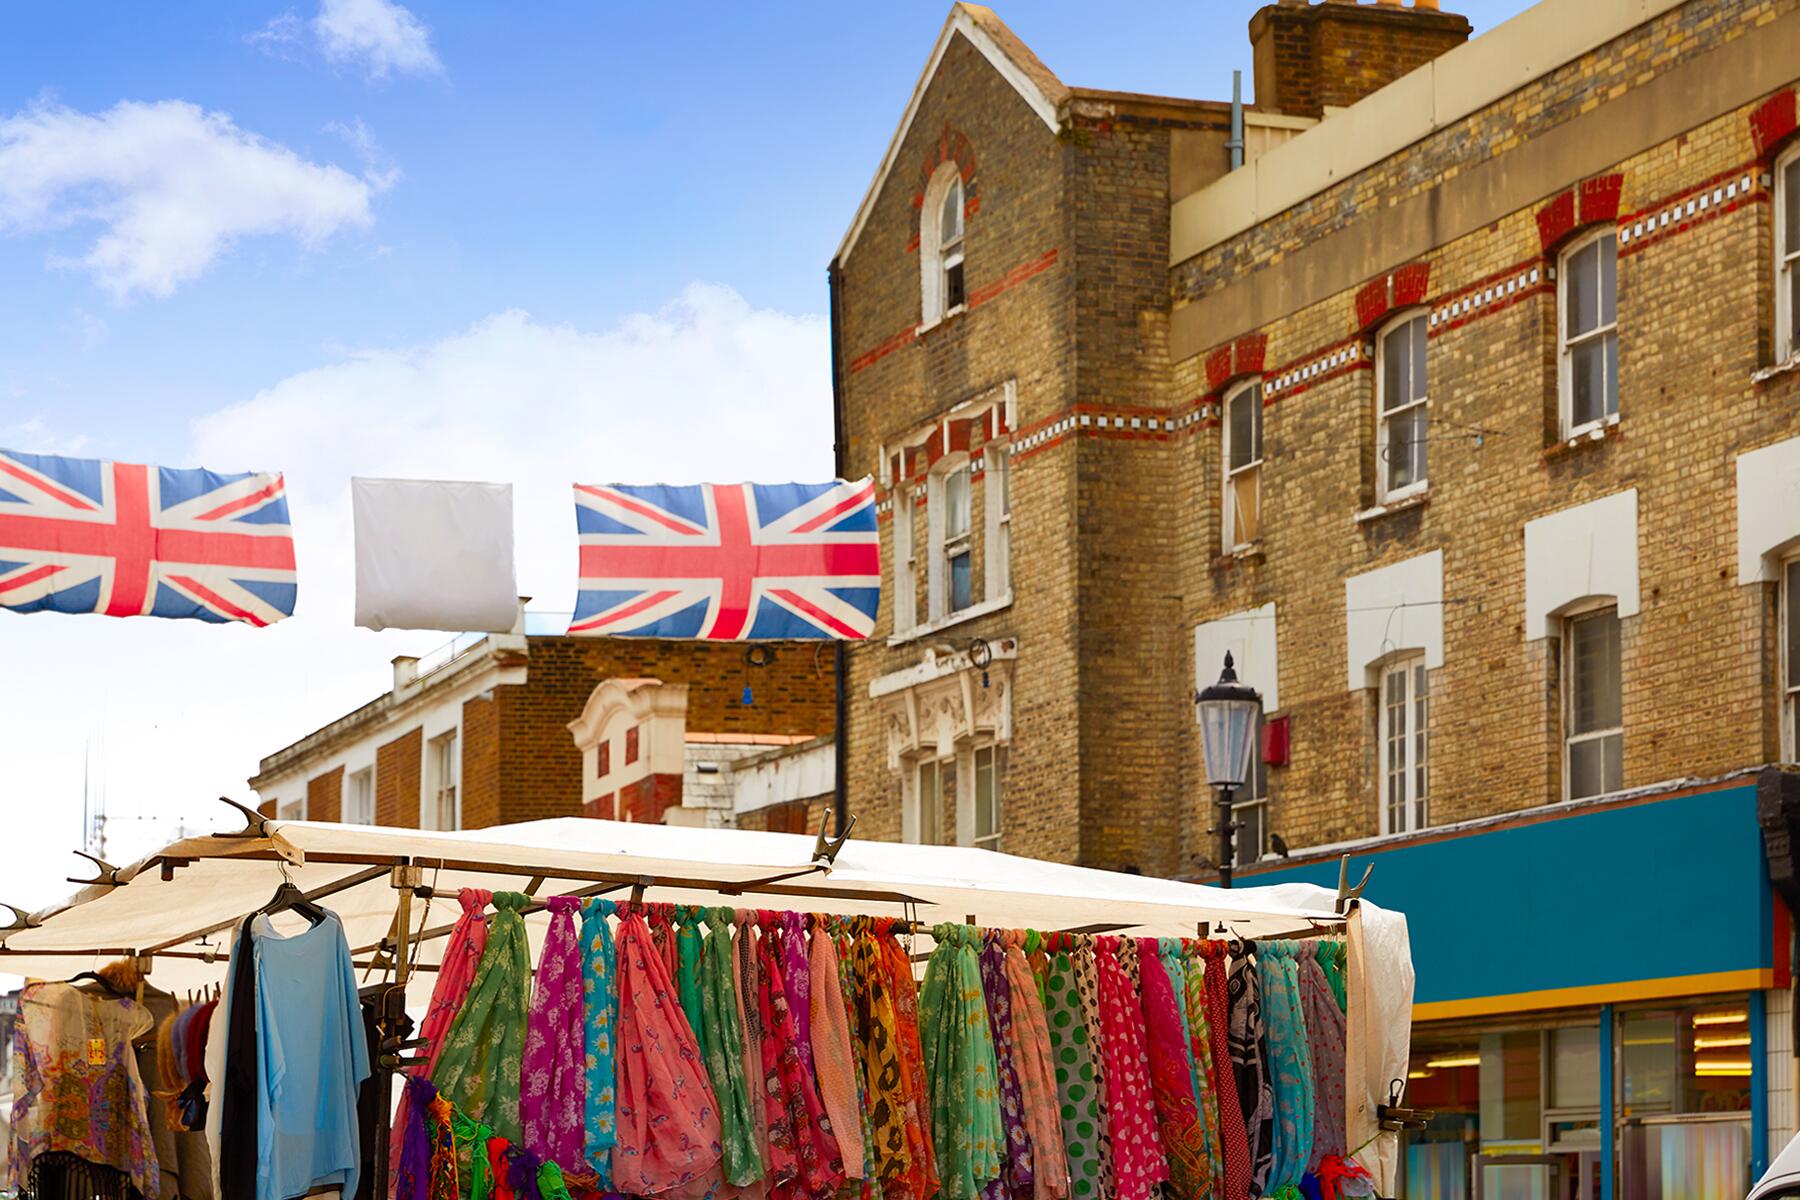 <a href='https://www.fodors.com/world/europe/england/london/experiences/news/photos/the-11-best-street-markets-to-visit-in-london#'>From &quot;The 11 Best Street Markets to Visit in London&quot;</a>